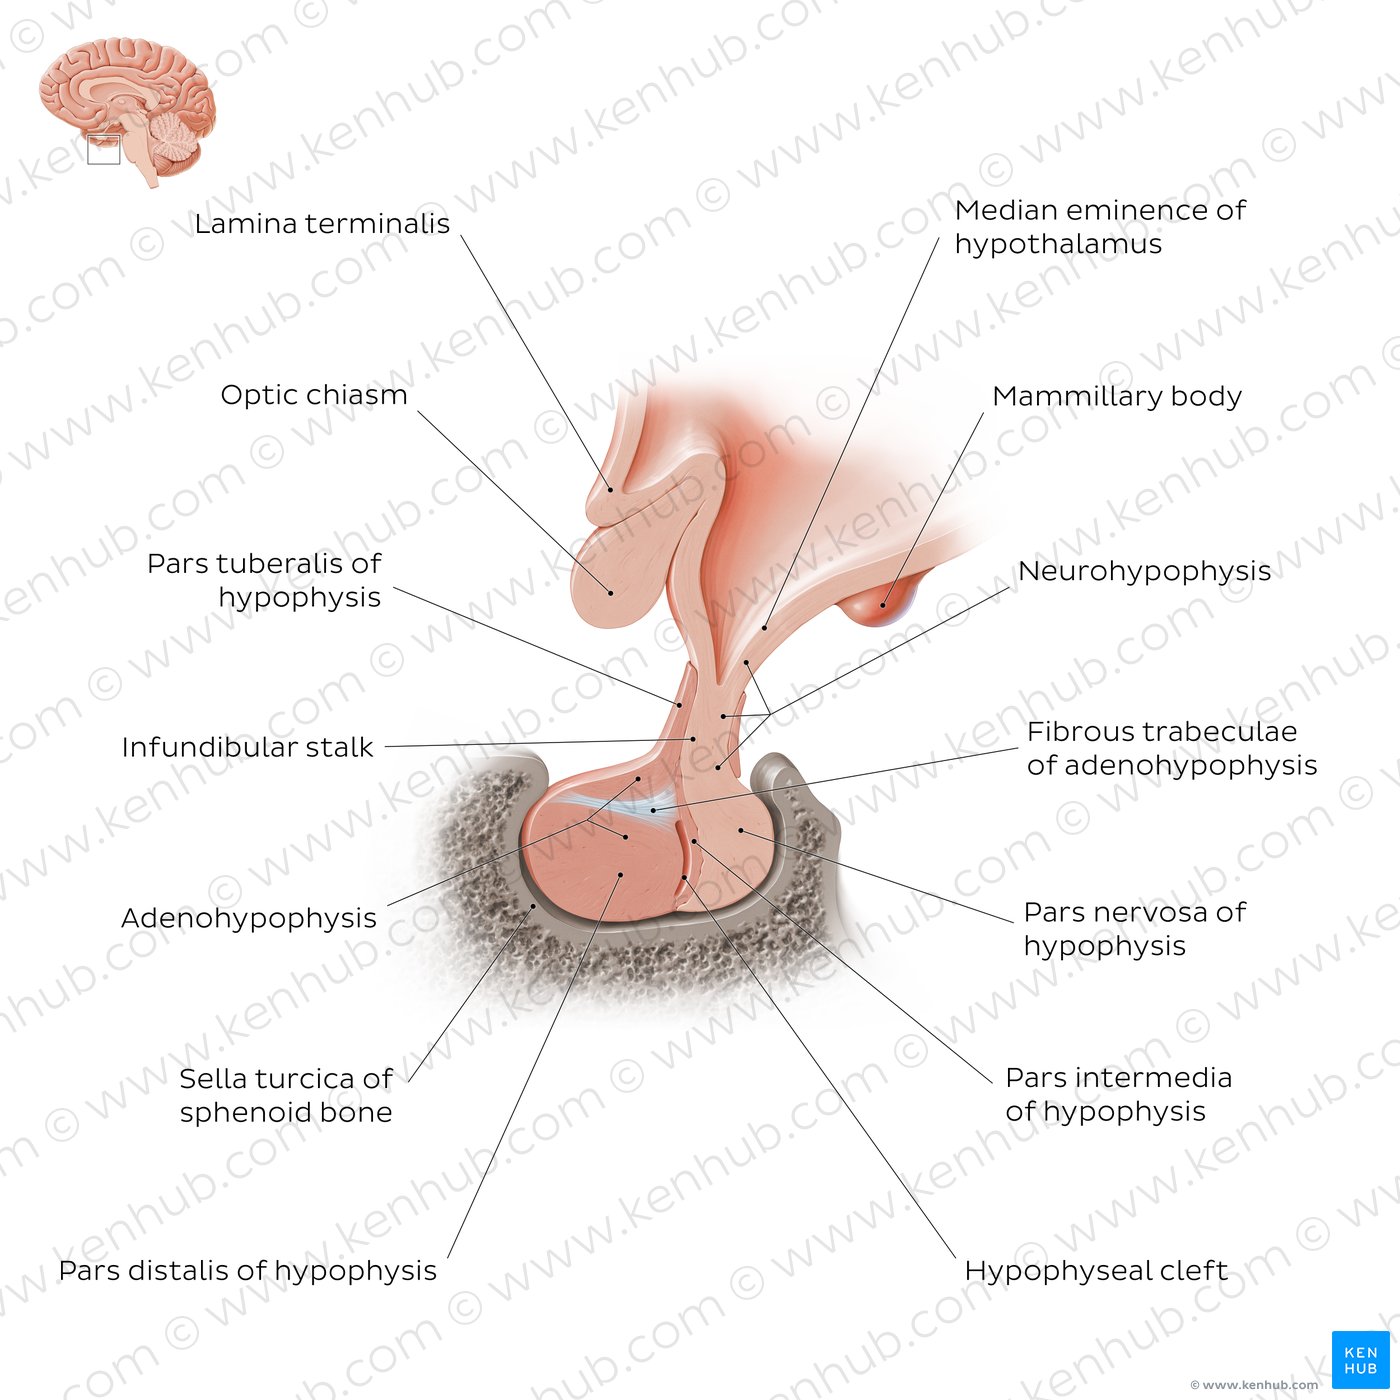 Pituitary gland: Overview